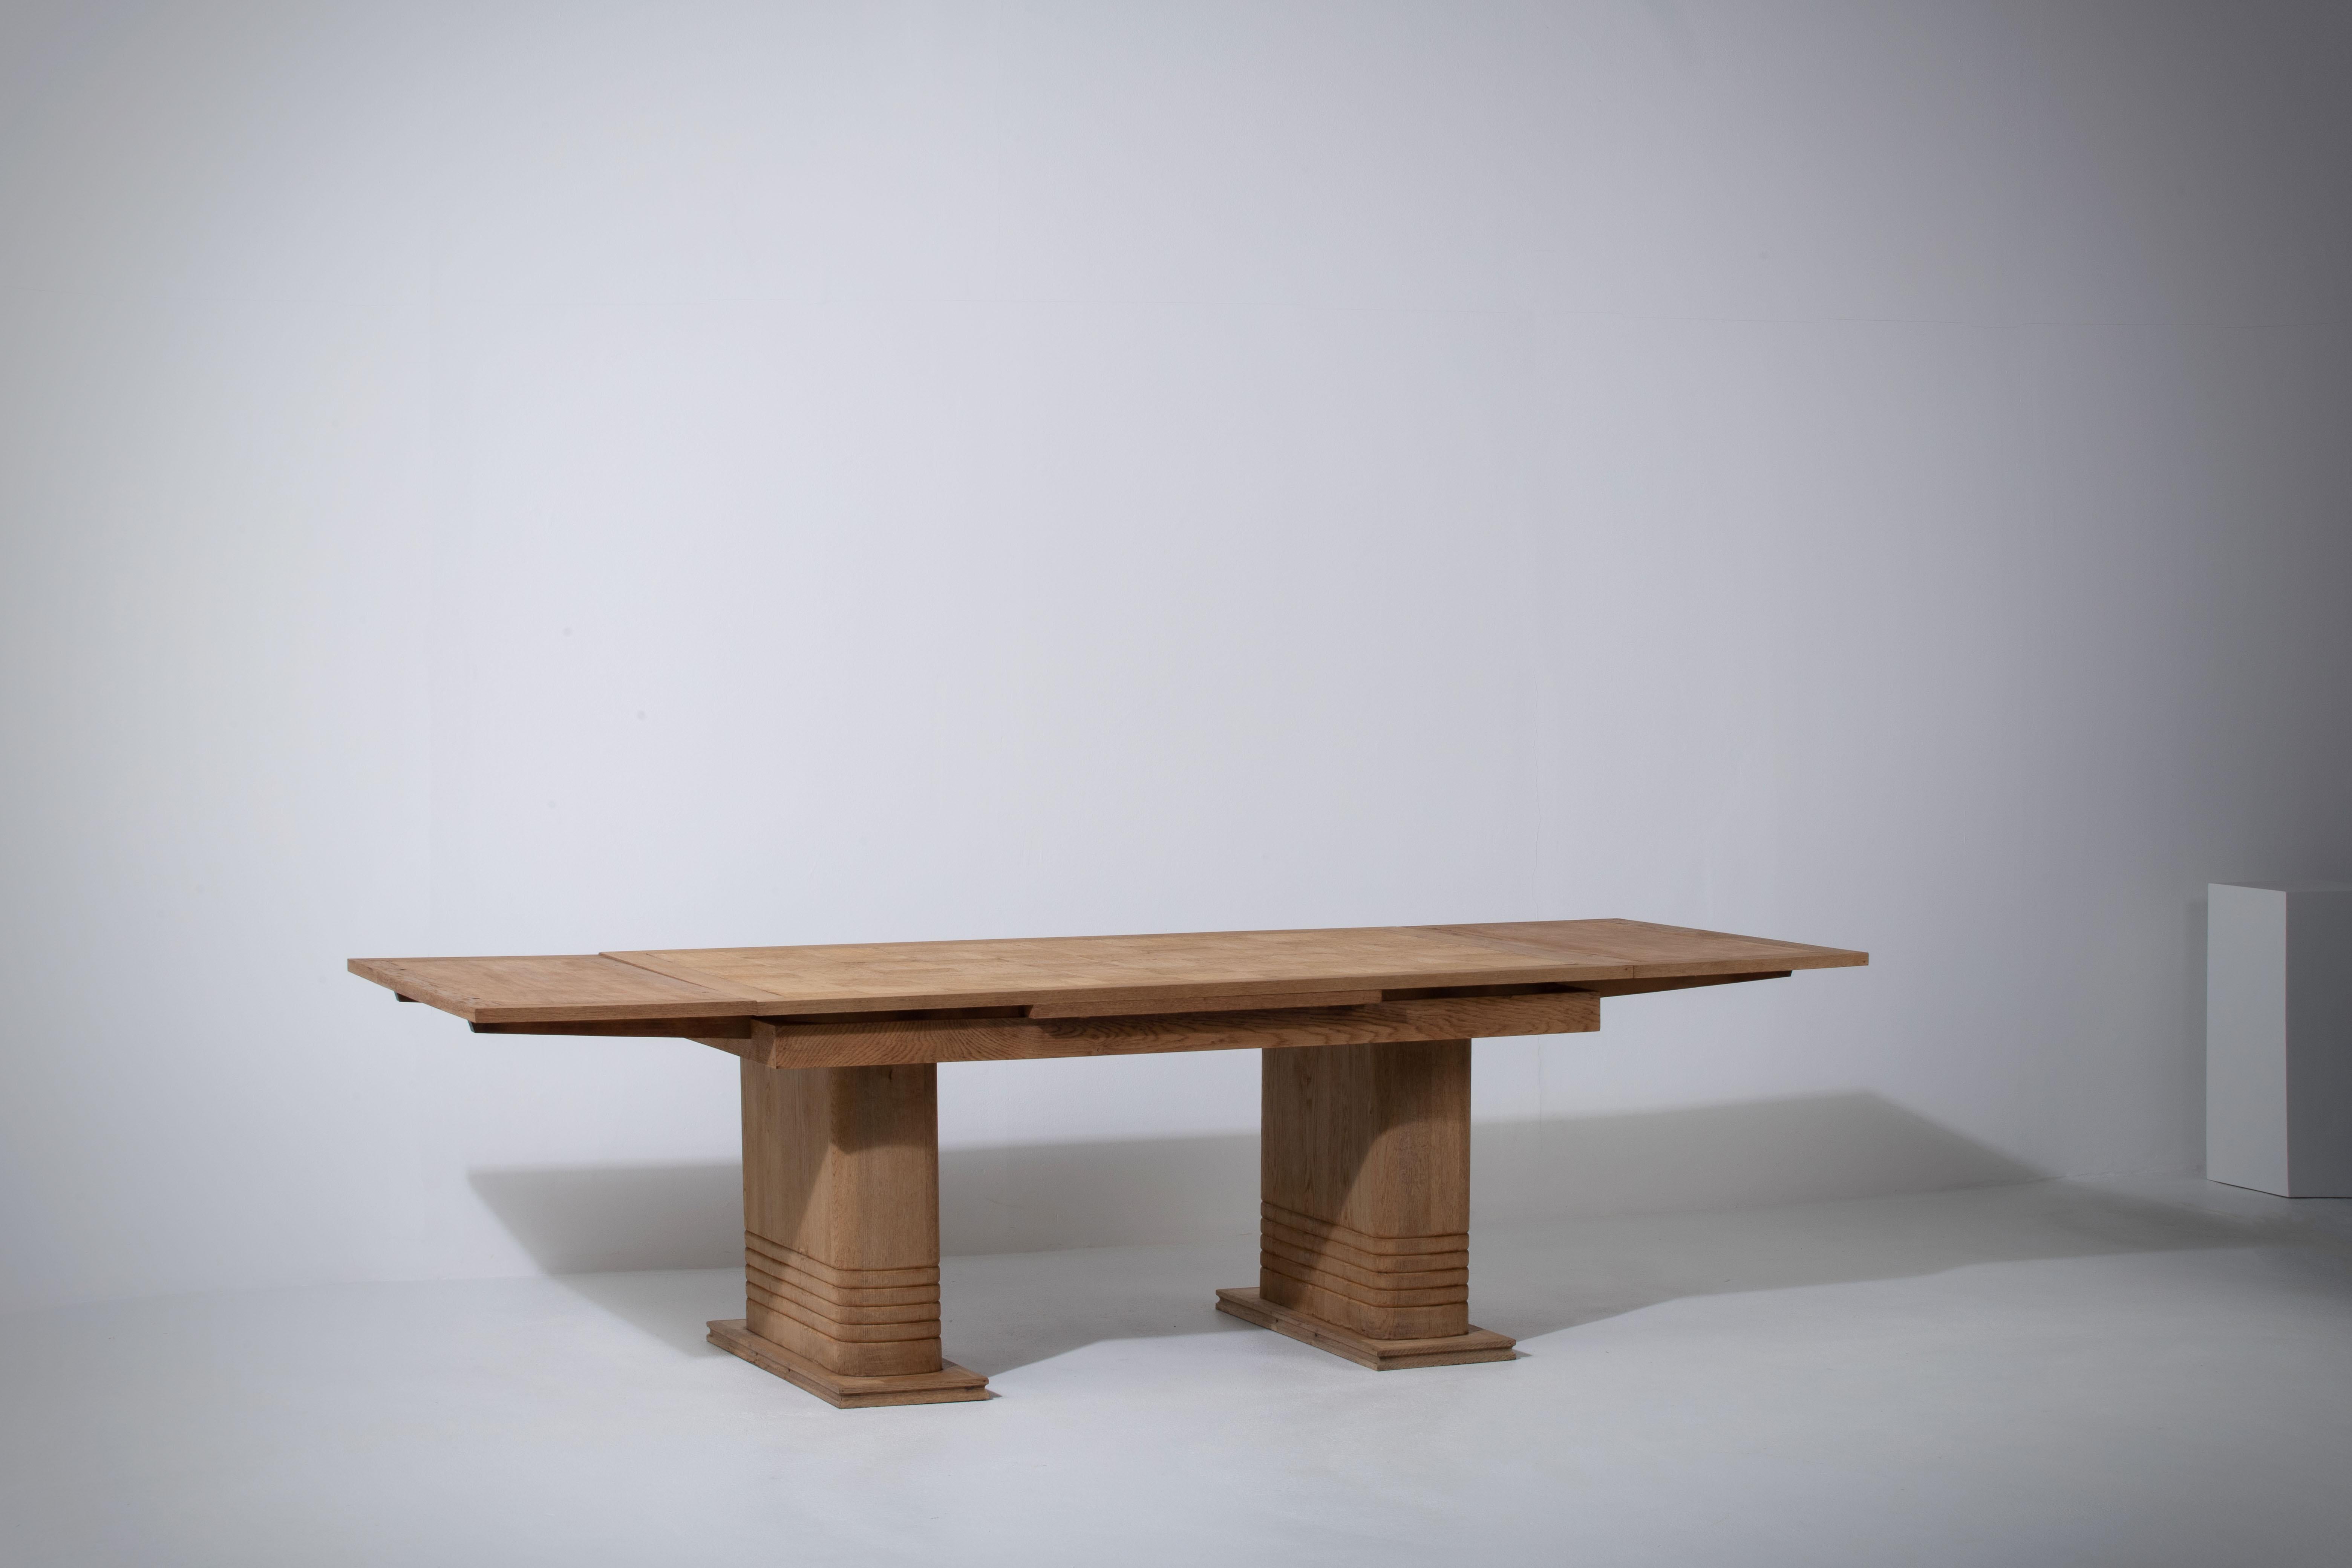 French Large Art Deco Table Oak, Dudouyt, 1940s For Sale 1